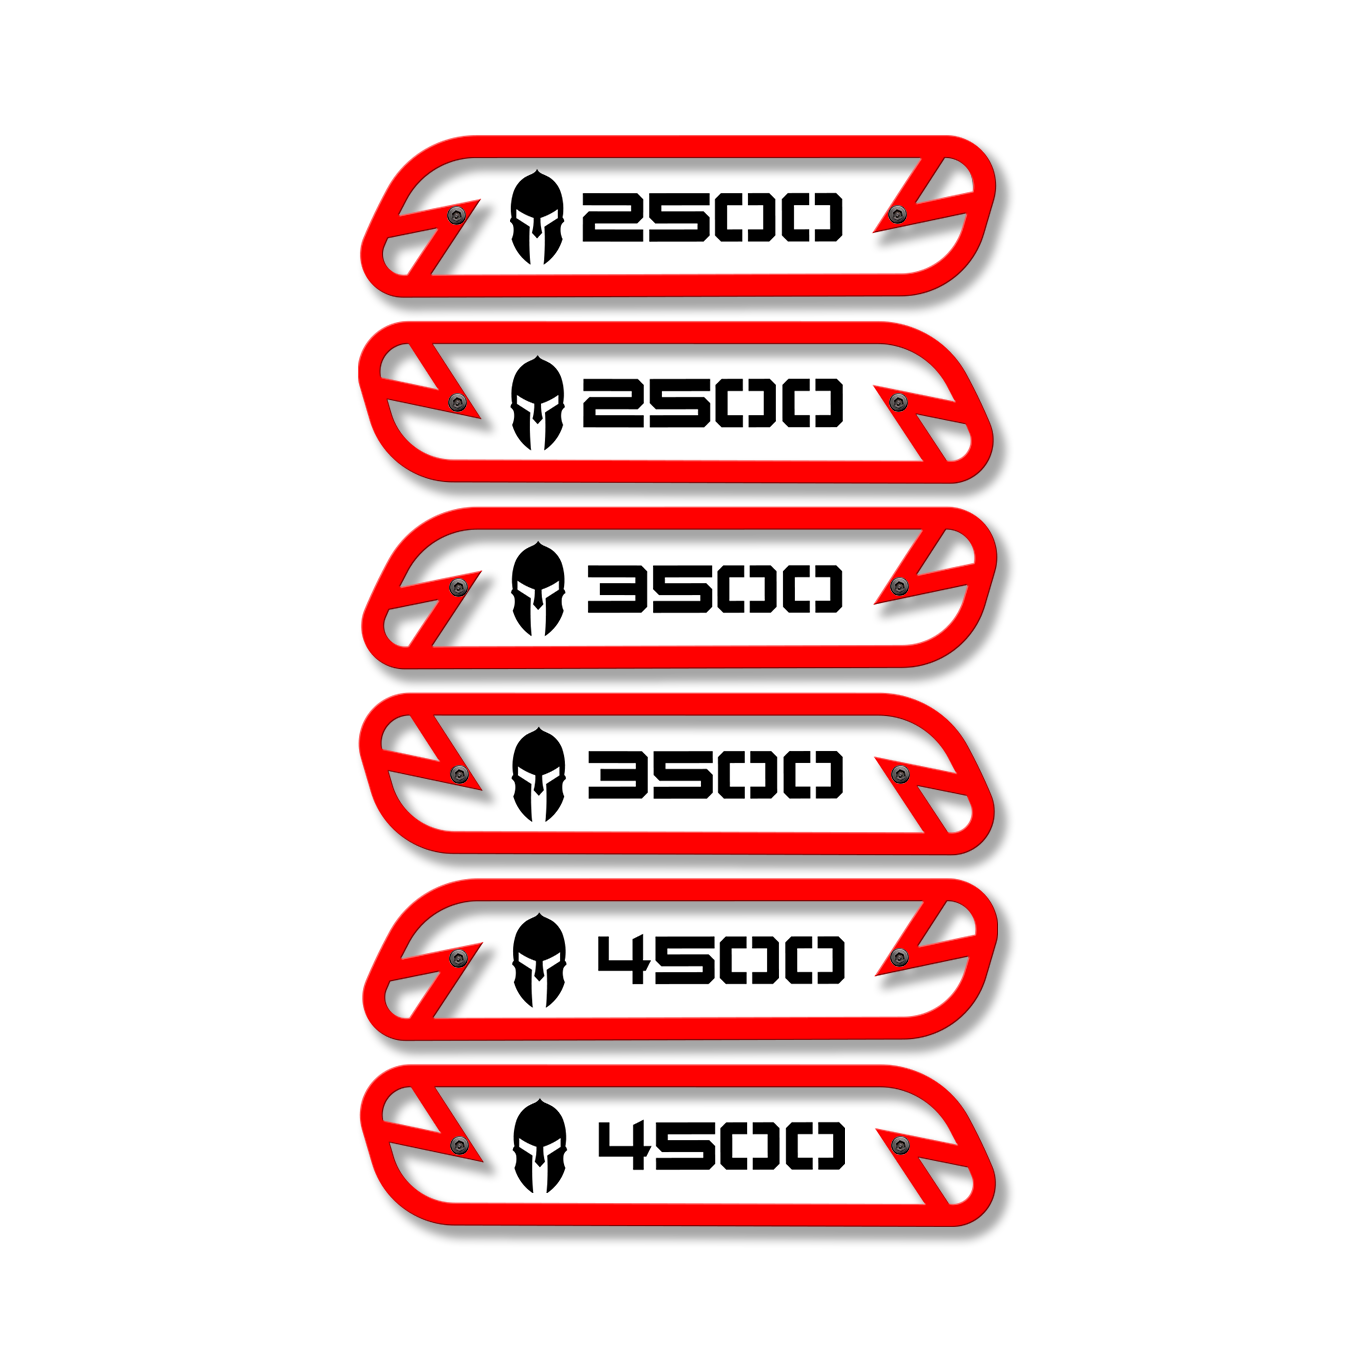 Spartan 2500/3500/4500 Hood Emblem Replacements - Fits 2019-2022 Ram® 2500, 3500, 4500 - Fully Customizable, LED or Non-LED